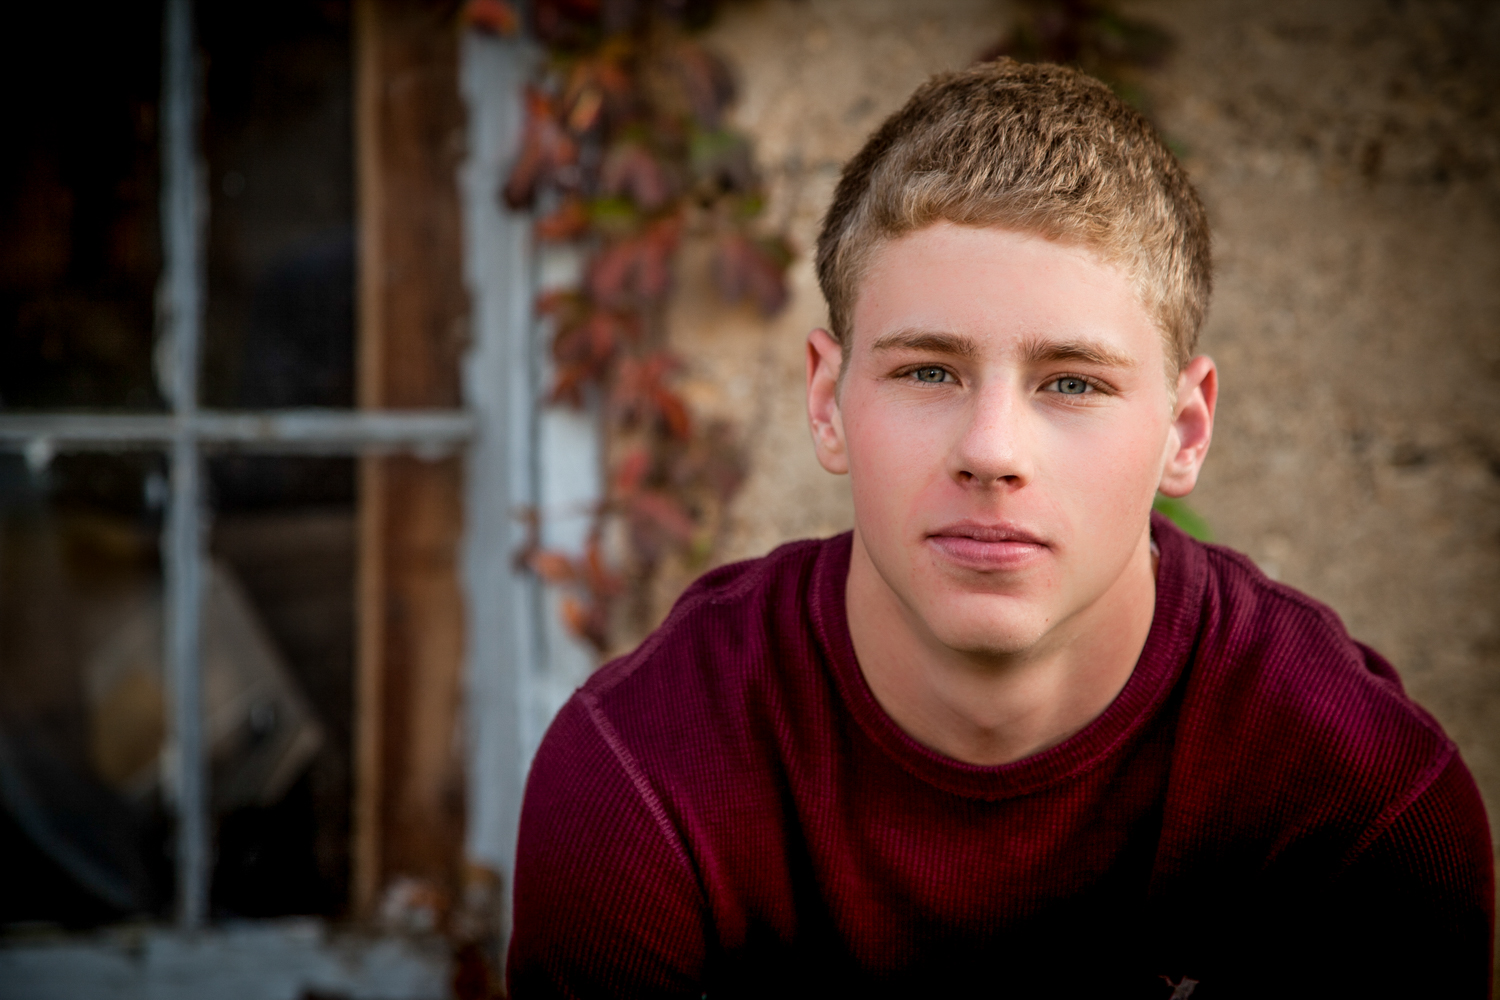 Portrait-HIgh-School-Seniors-young-male-in-front-of-window-012.jpg